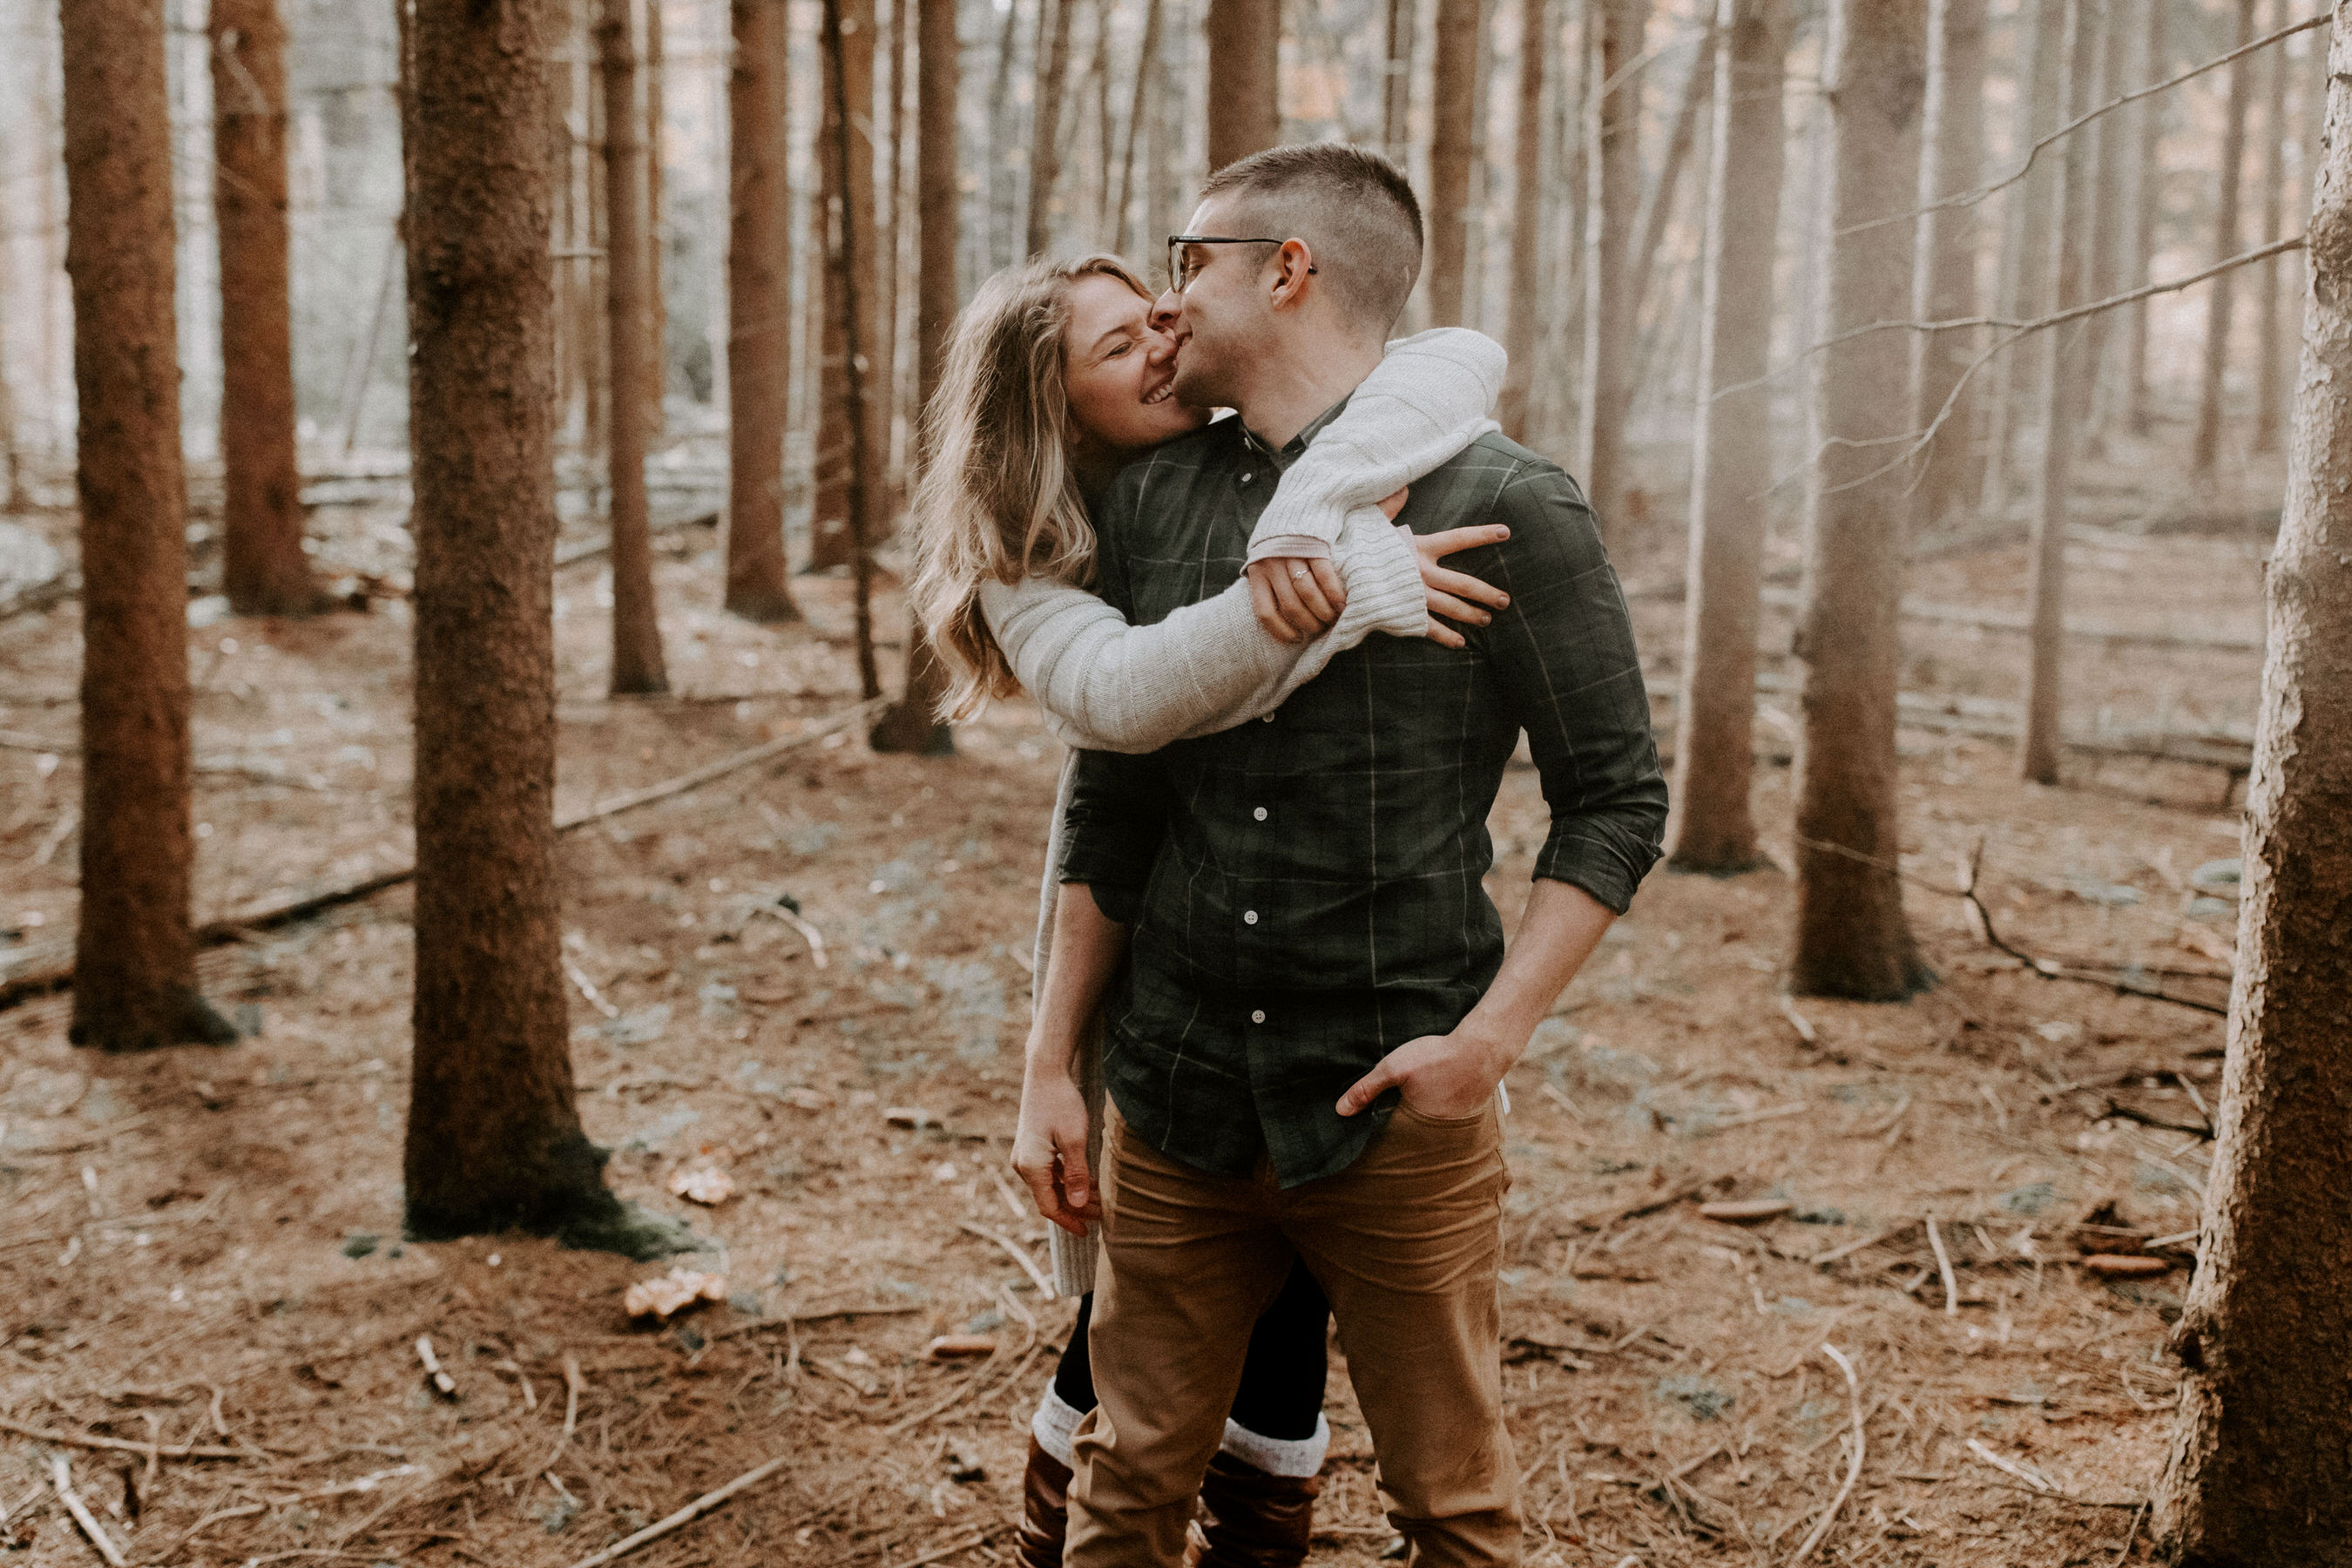 Colorful, Fall, West Michigan, Engagement, Josh Rexford, Photographer